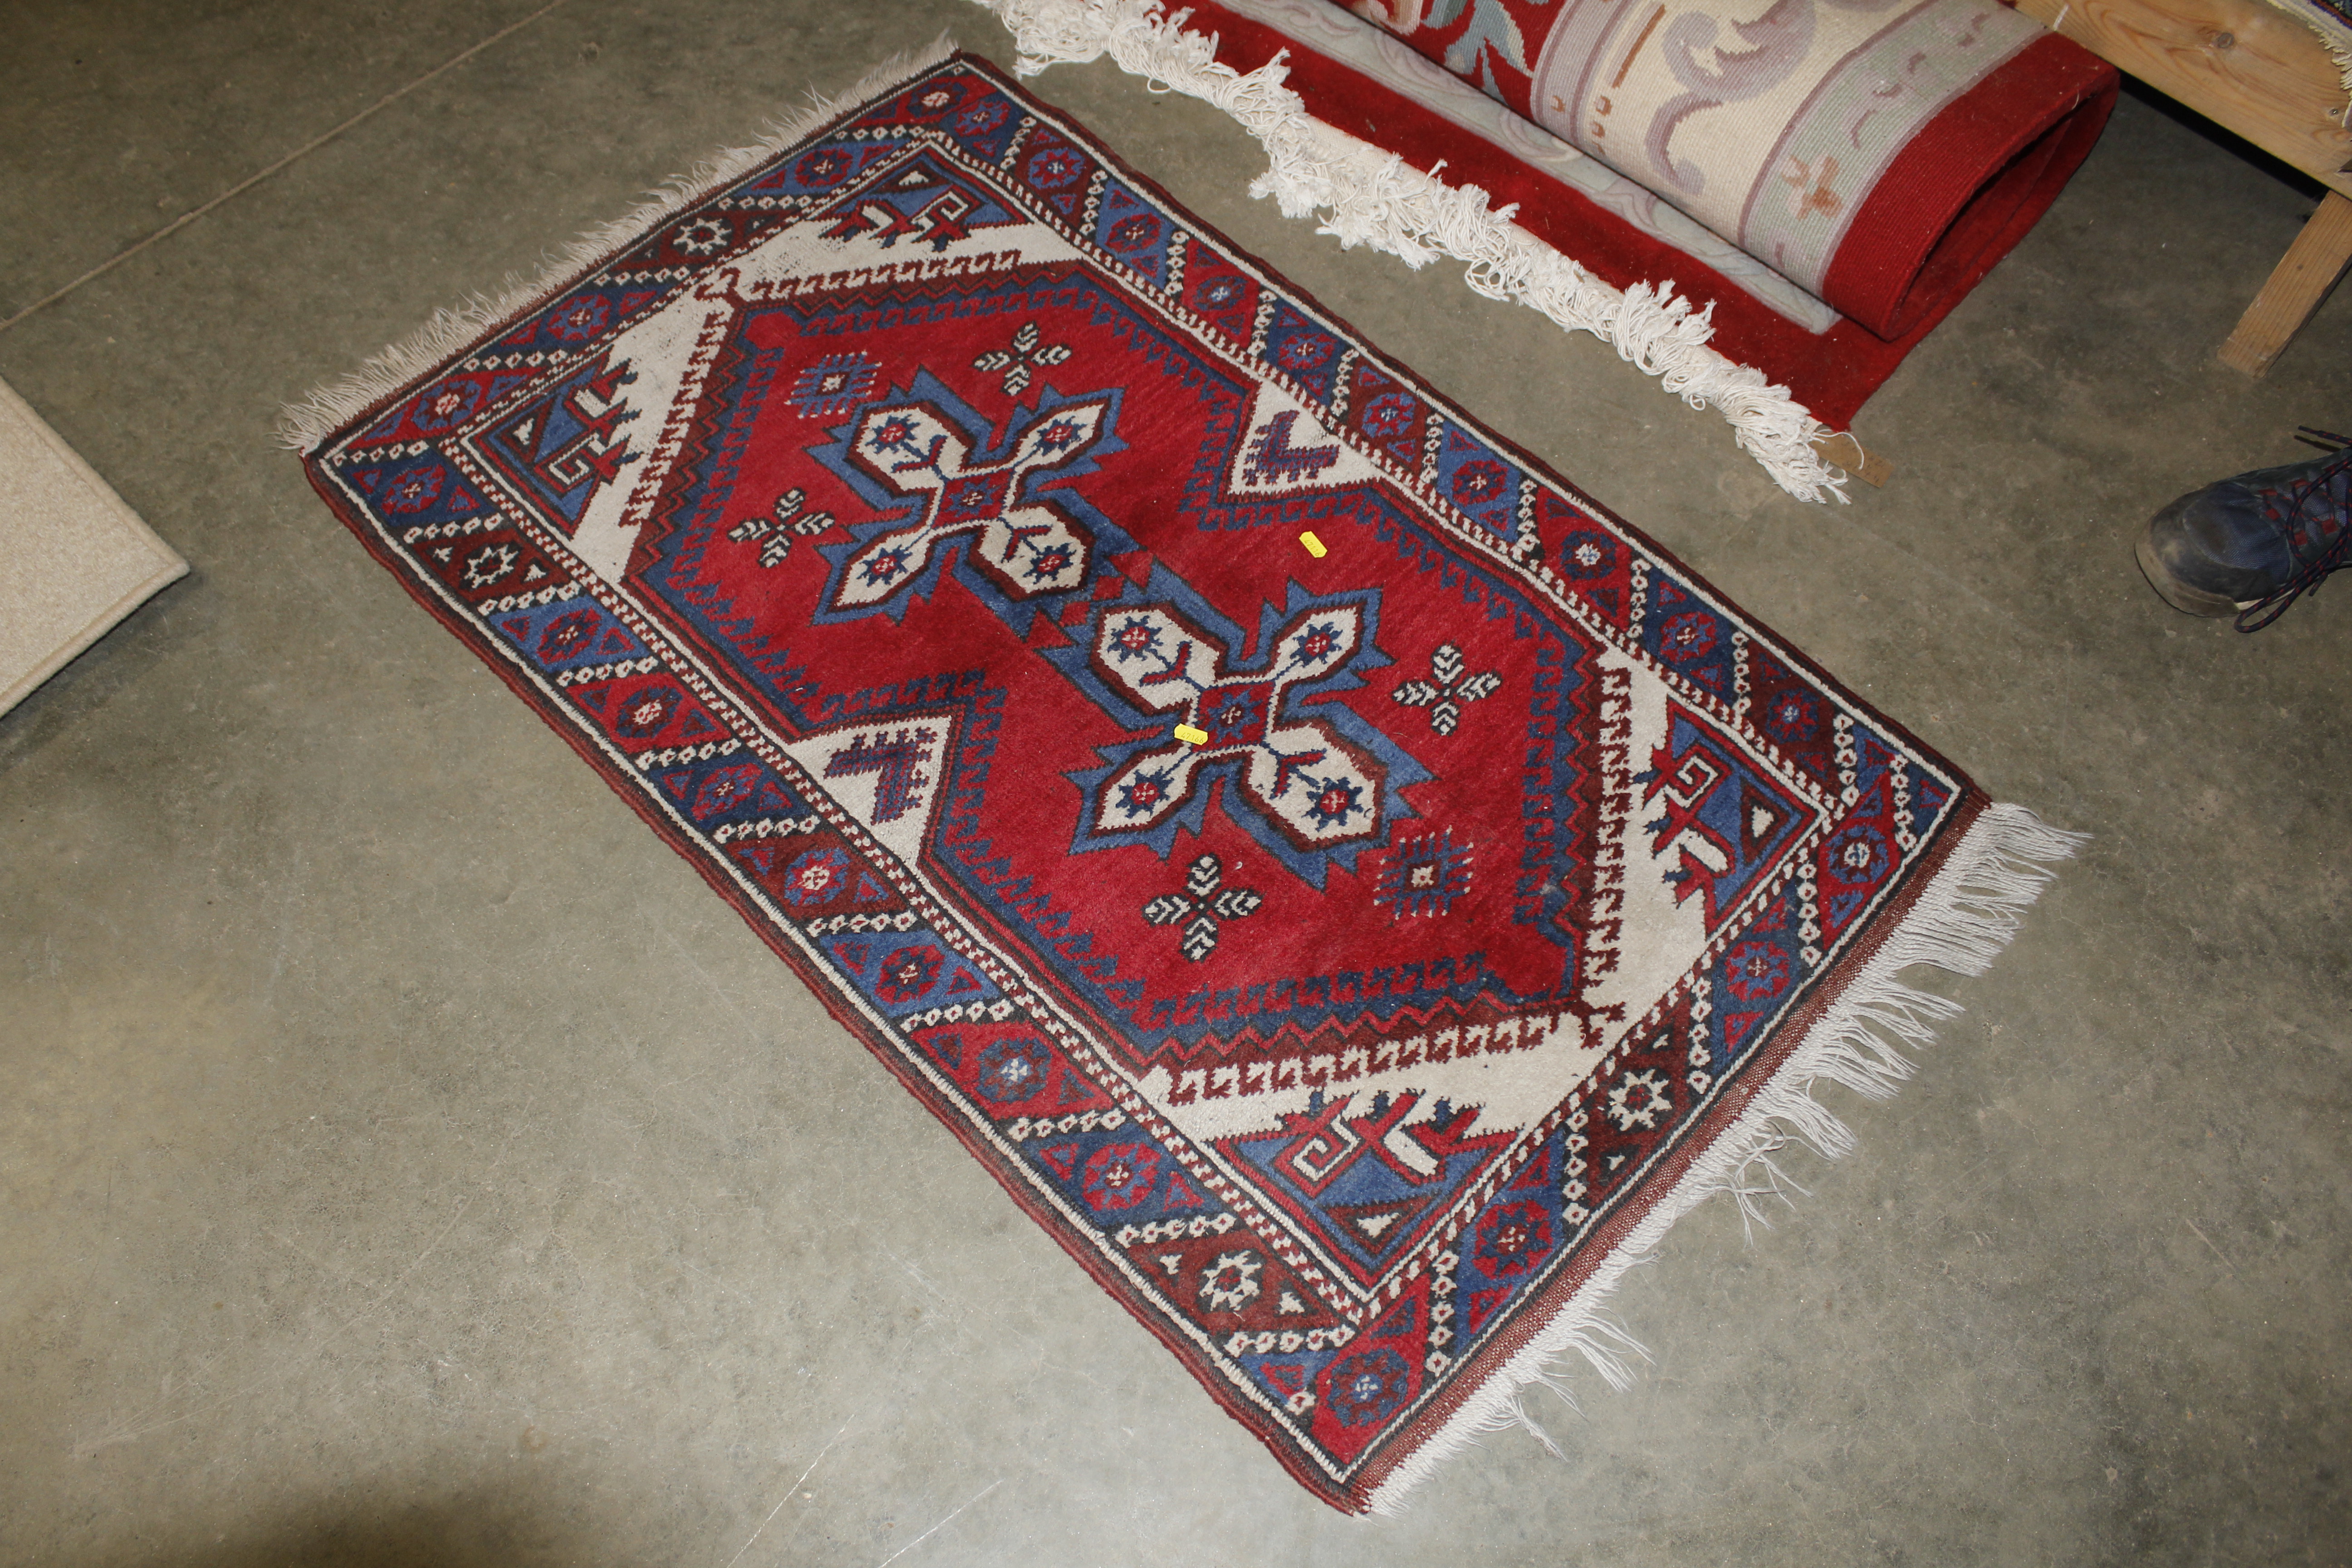 An approx. 4'2" x 2'5" red and blue patterned rug